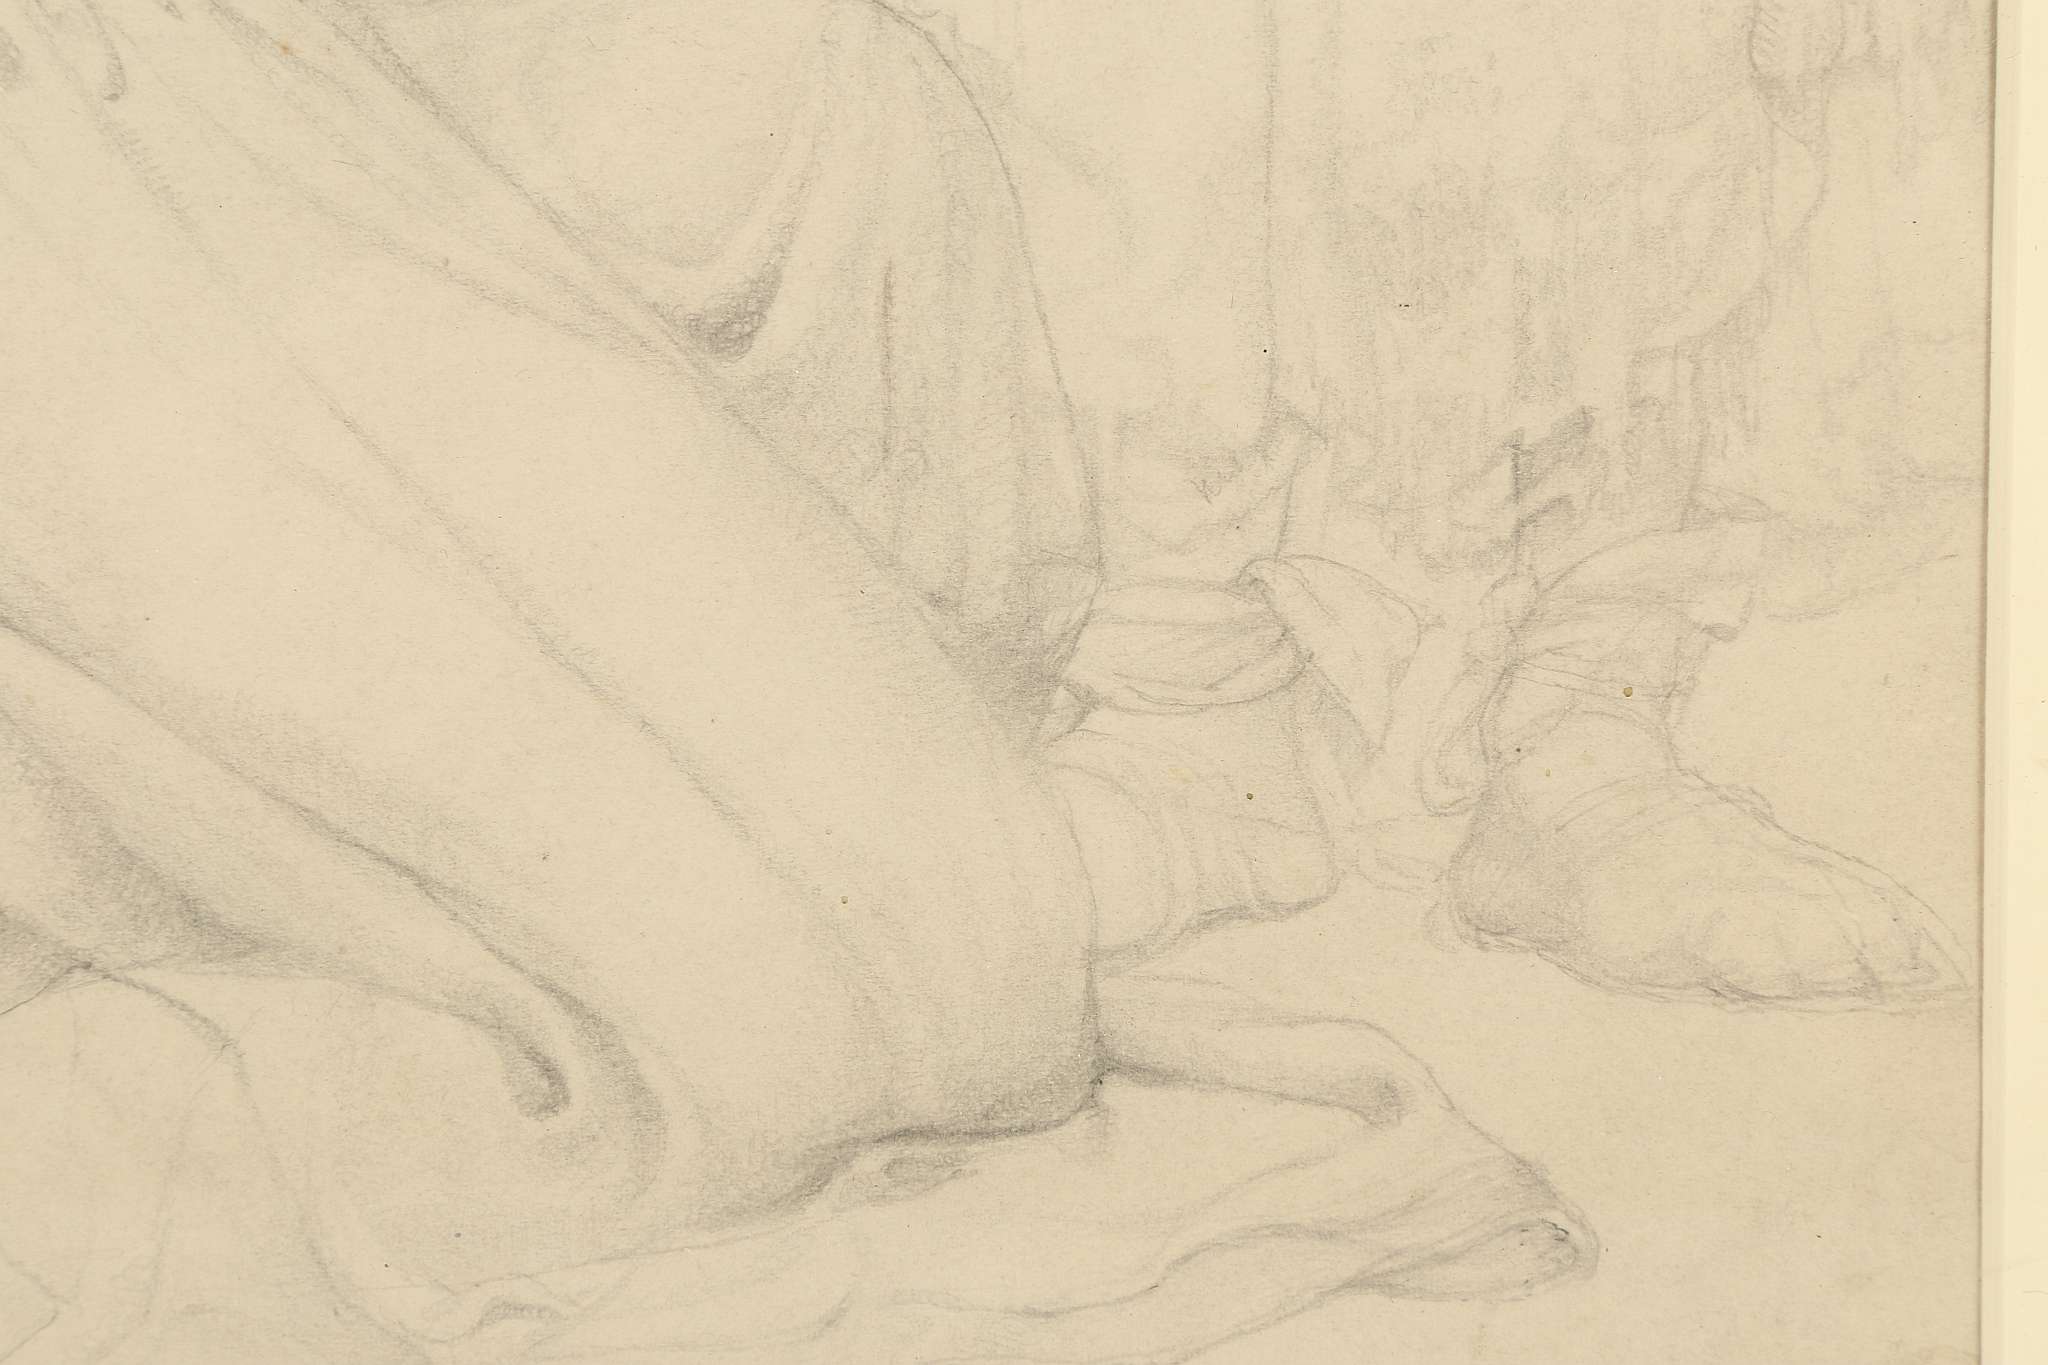 Noel Laura Nisbet R.I. 1881-1956, 'The Blessing', pencil with studio secession stamp lower right, - Image 7 of 8